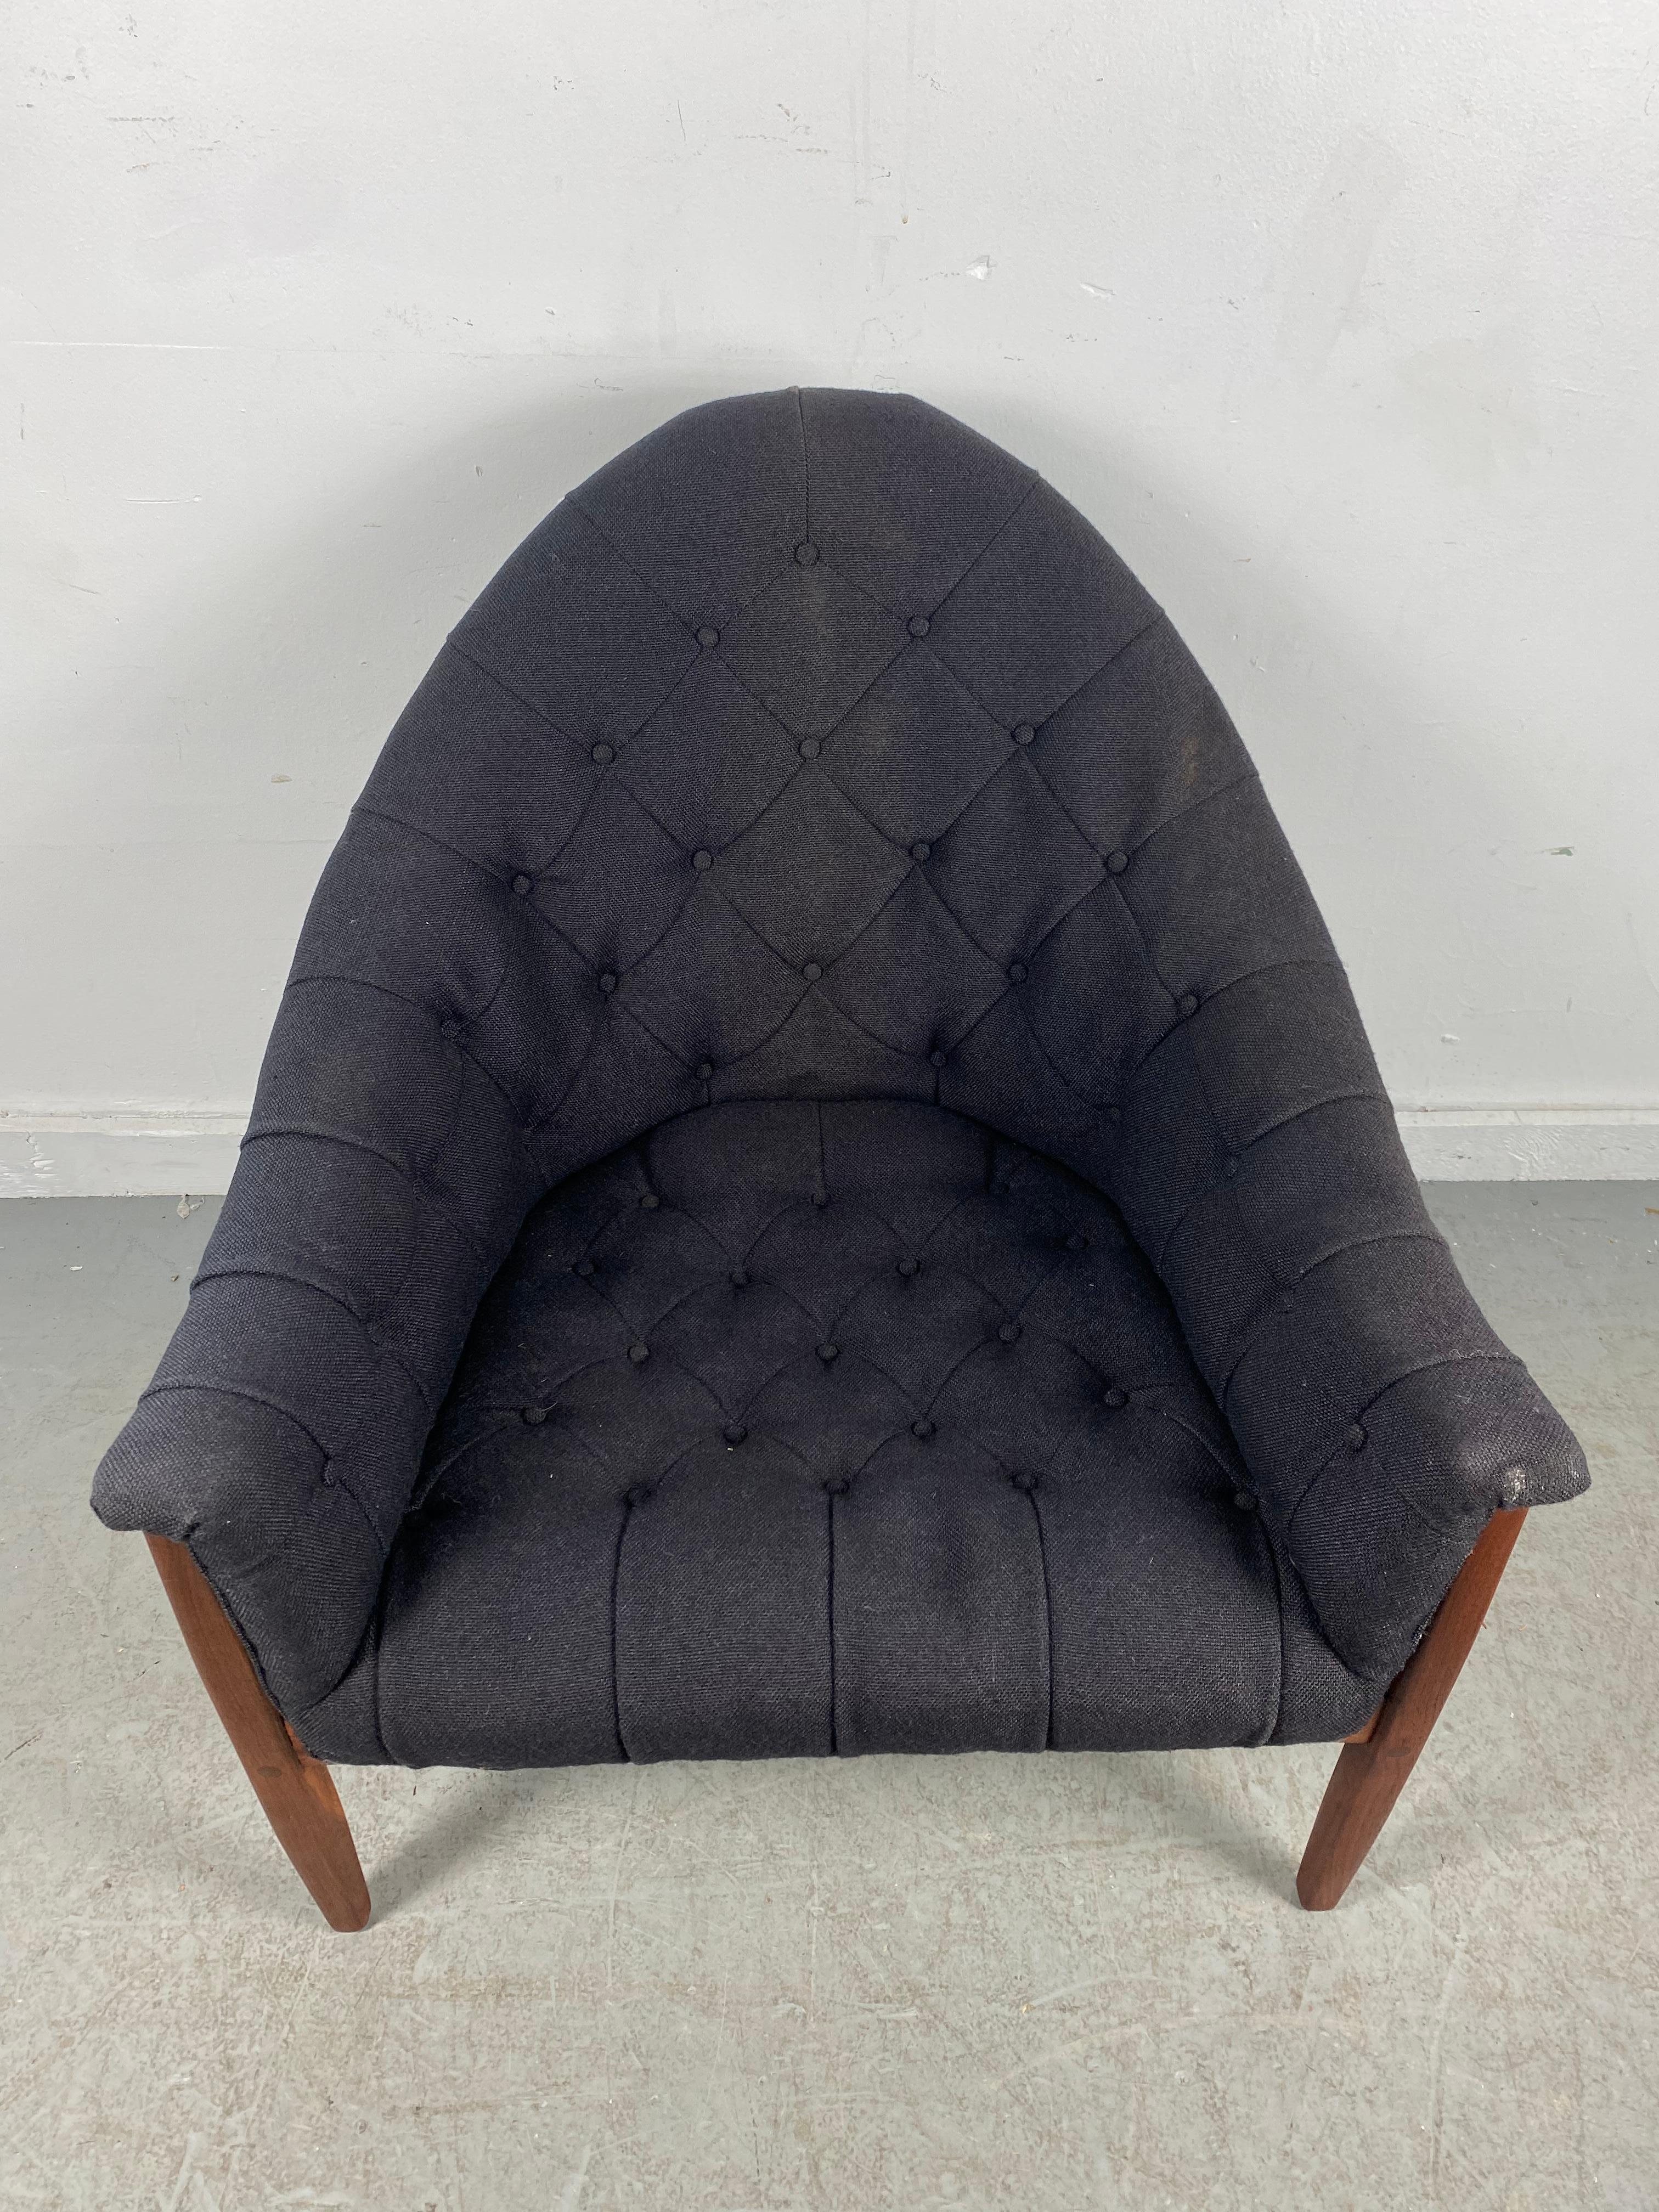 Fabric Thayer Coggin by Milo Baughman Rare Exposed Frame Lounge Chair Circa 1965 For Sale